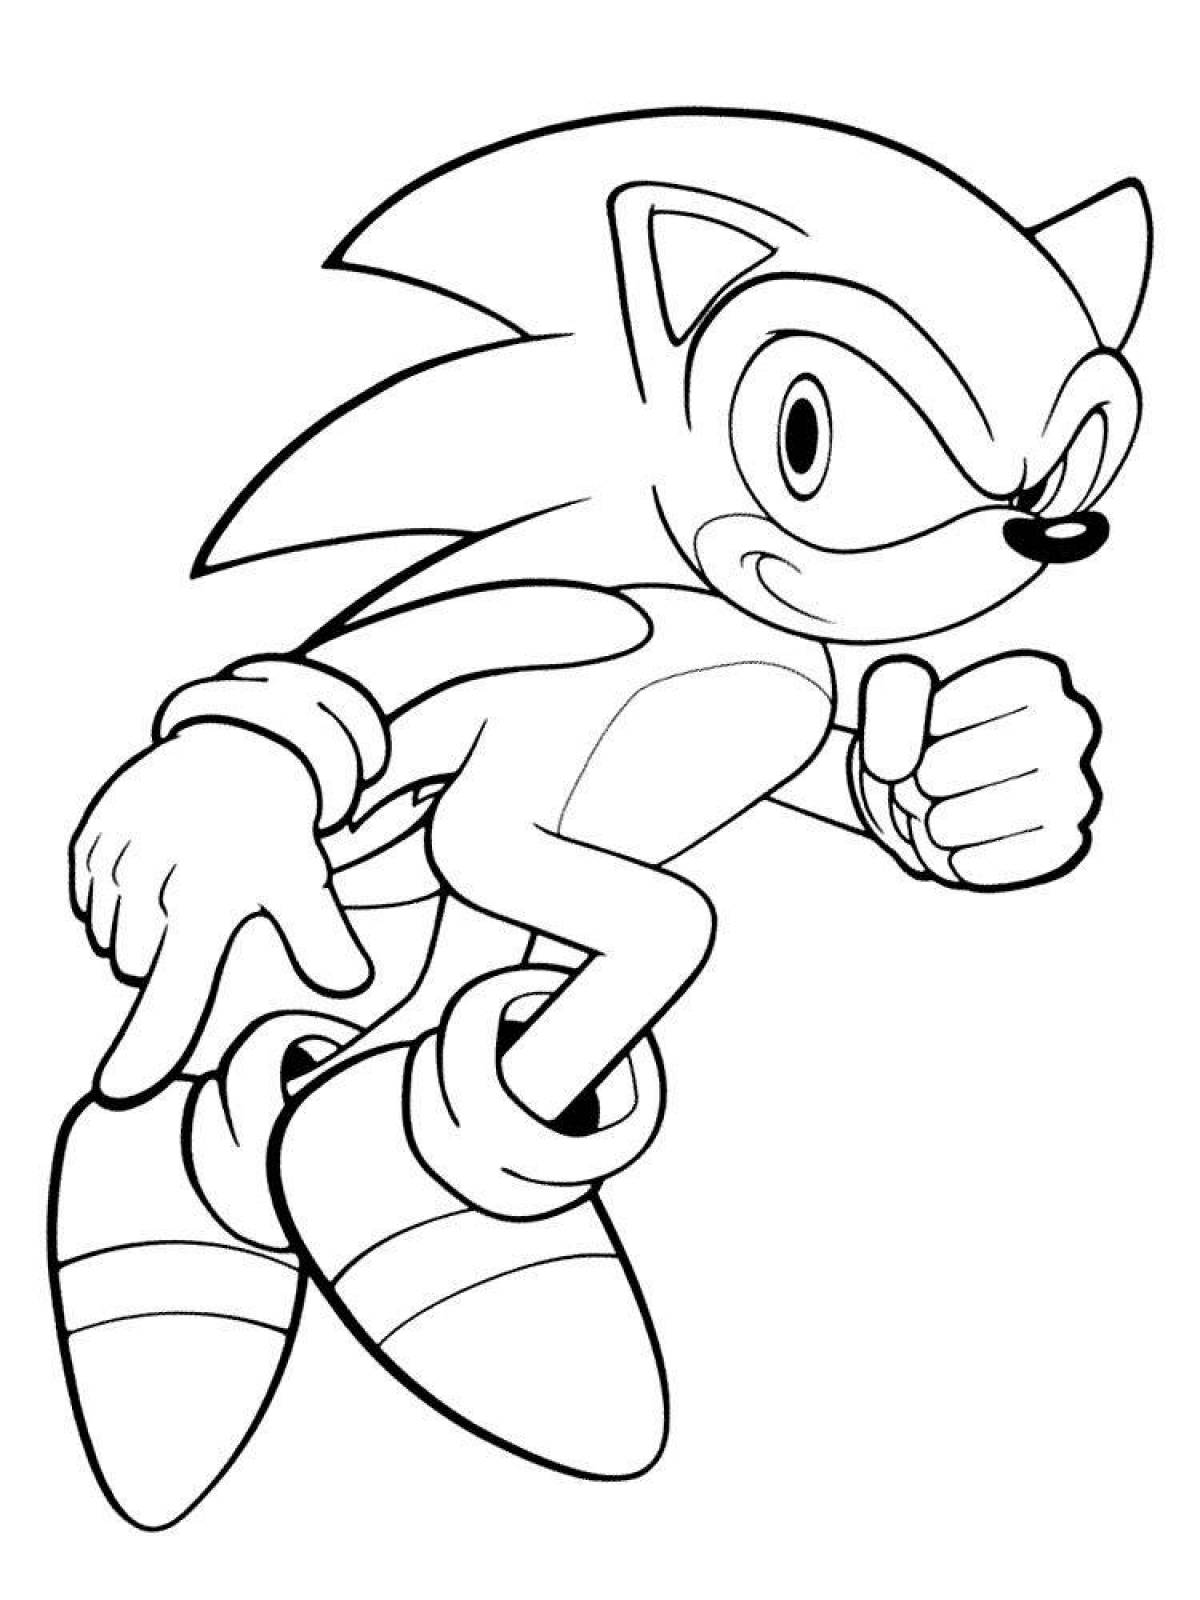 Incredible sonic coloring book for kids